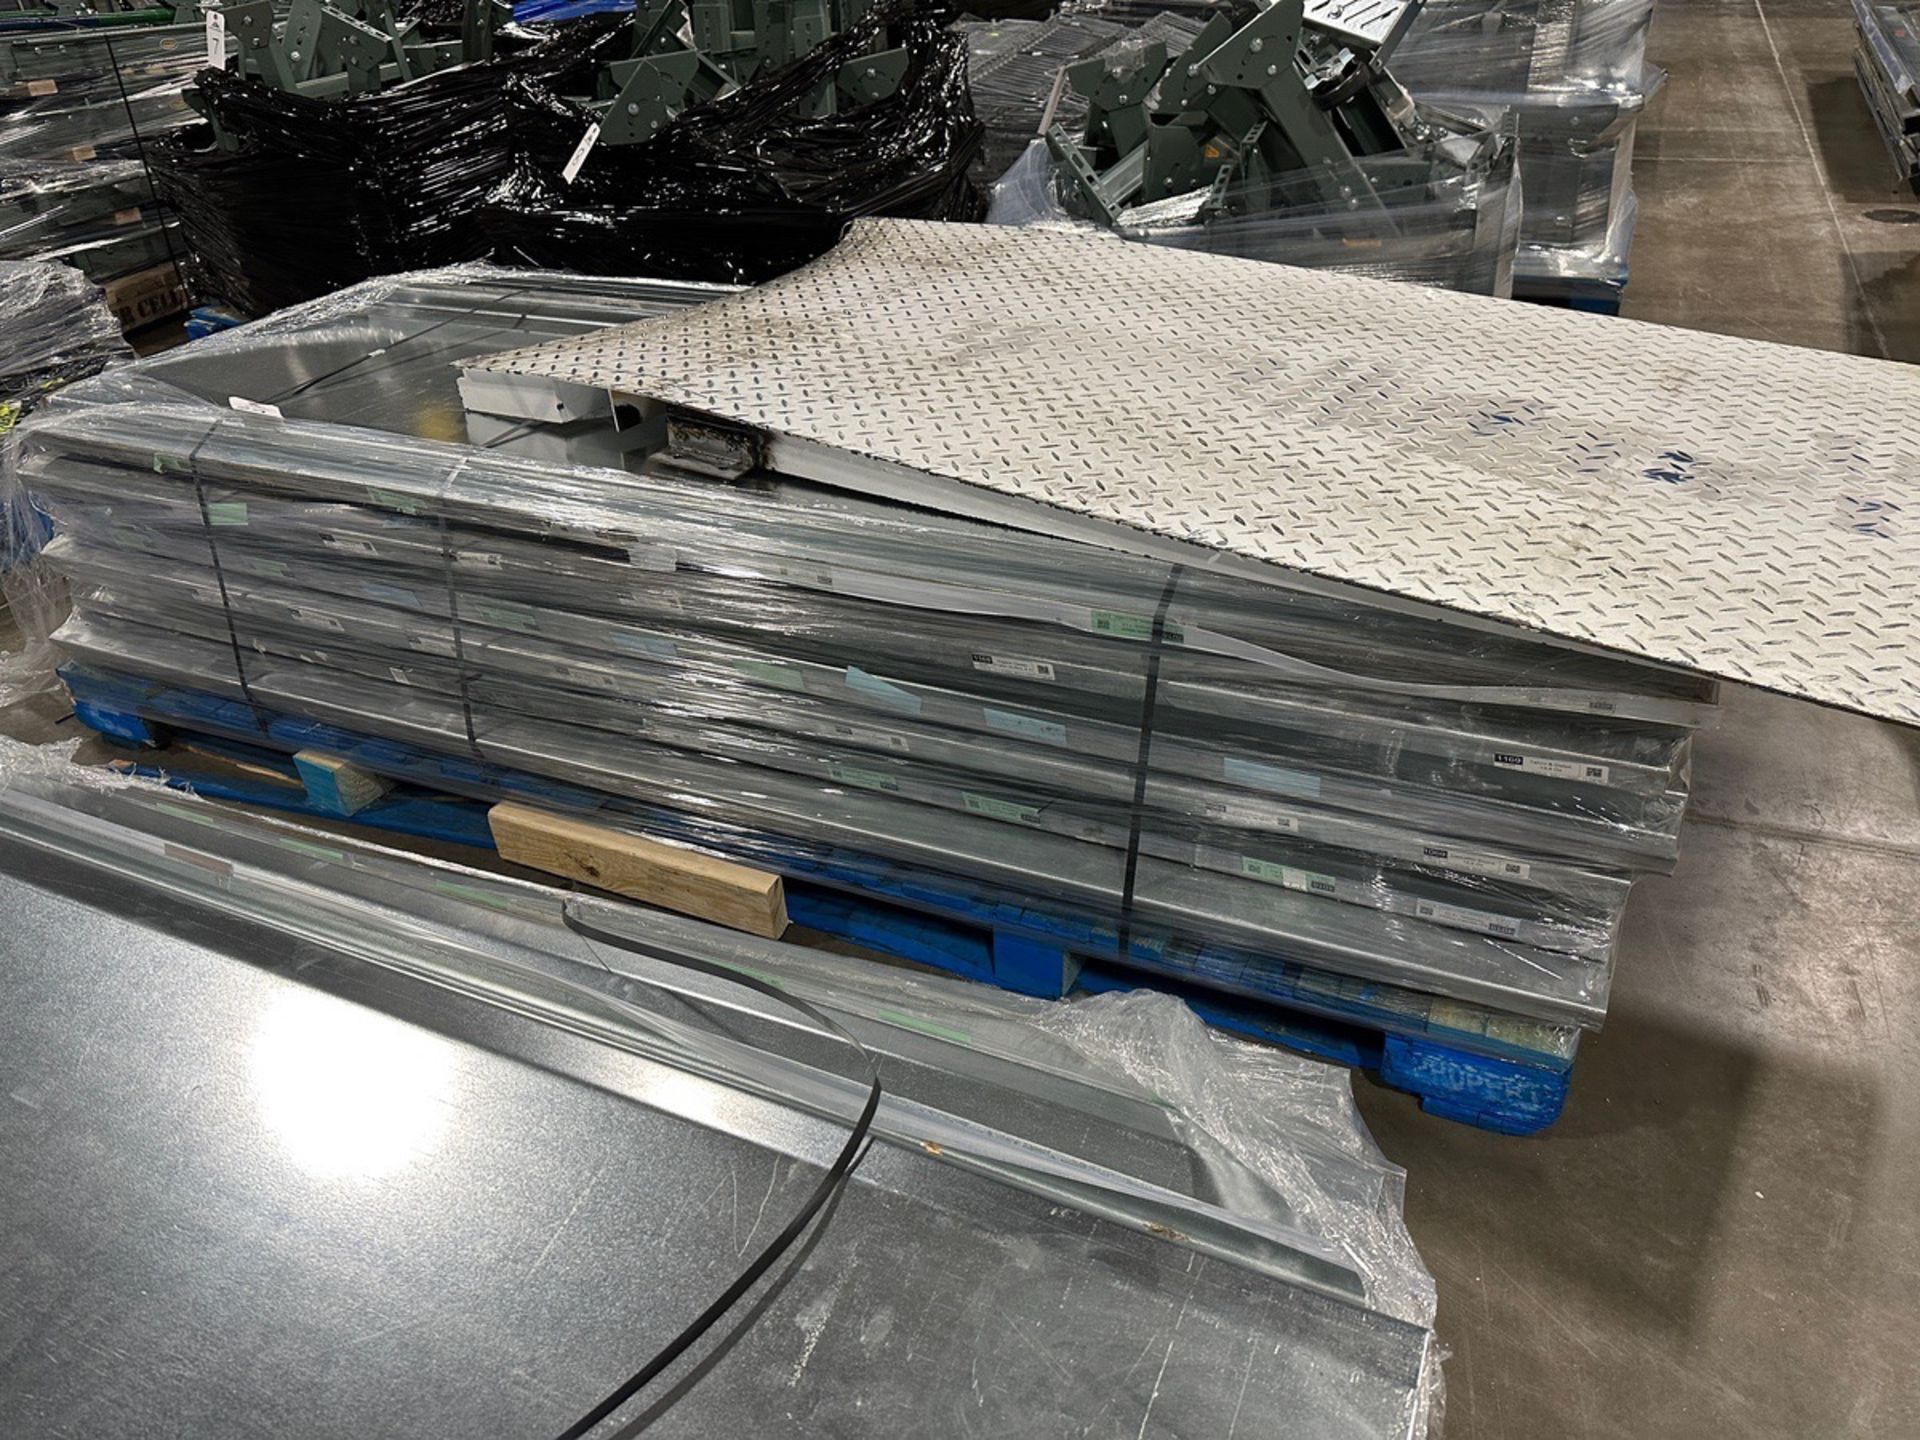 Lot of Approx. (60) Metal Shelves - 25" Deep x 95" Wide | Rig Fee $50